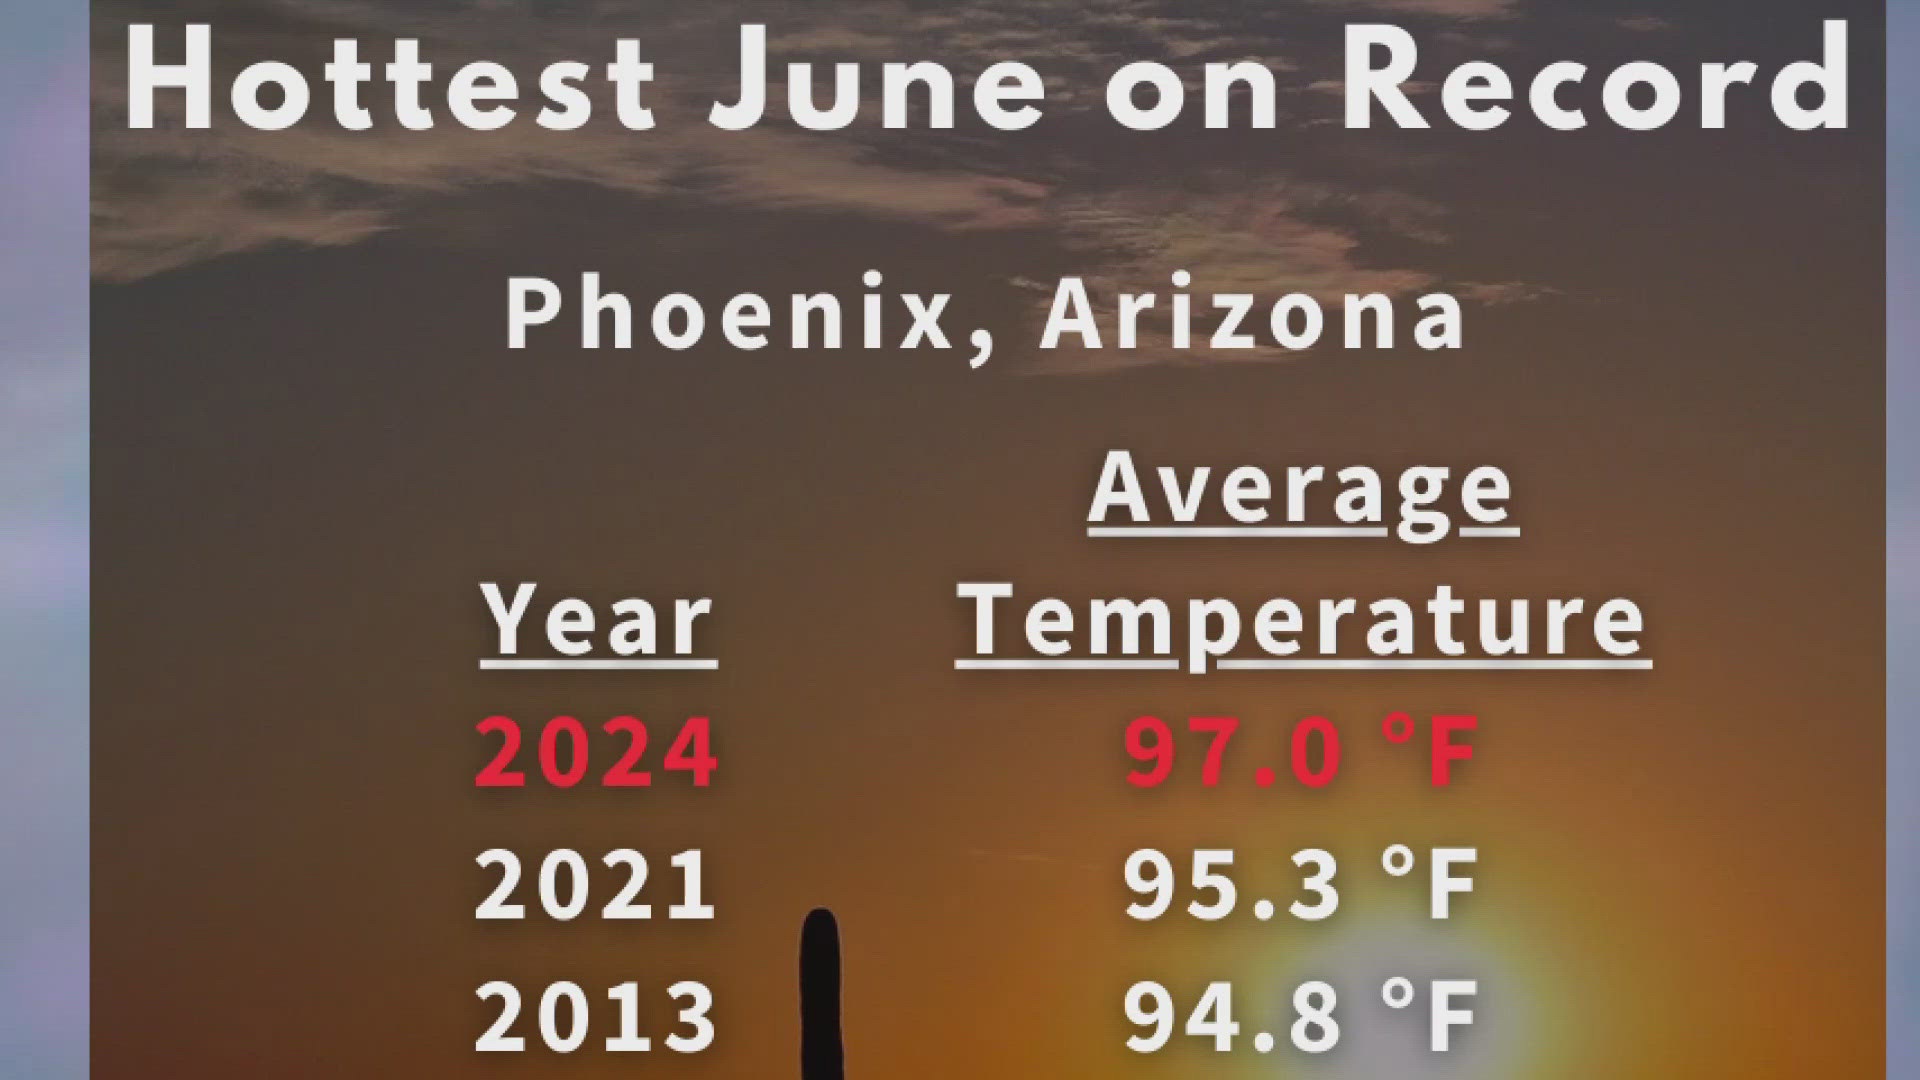 According to the National Weather Service, Phoenix had the hottest June in more than 100 years.